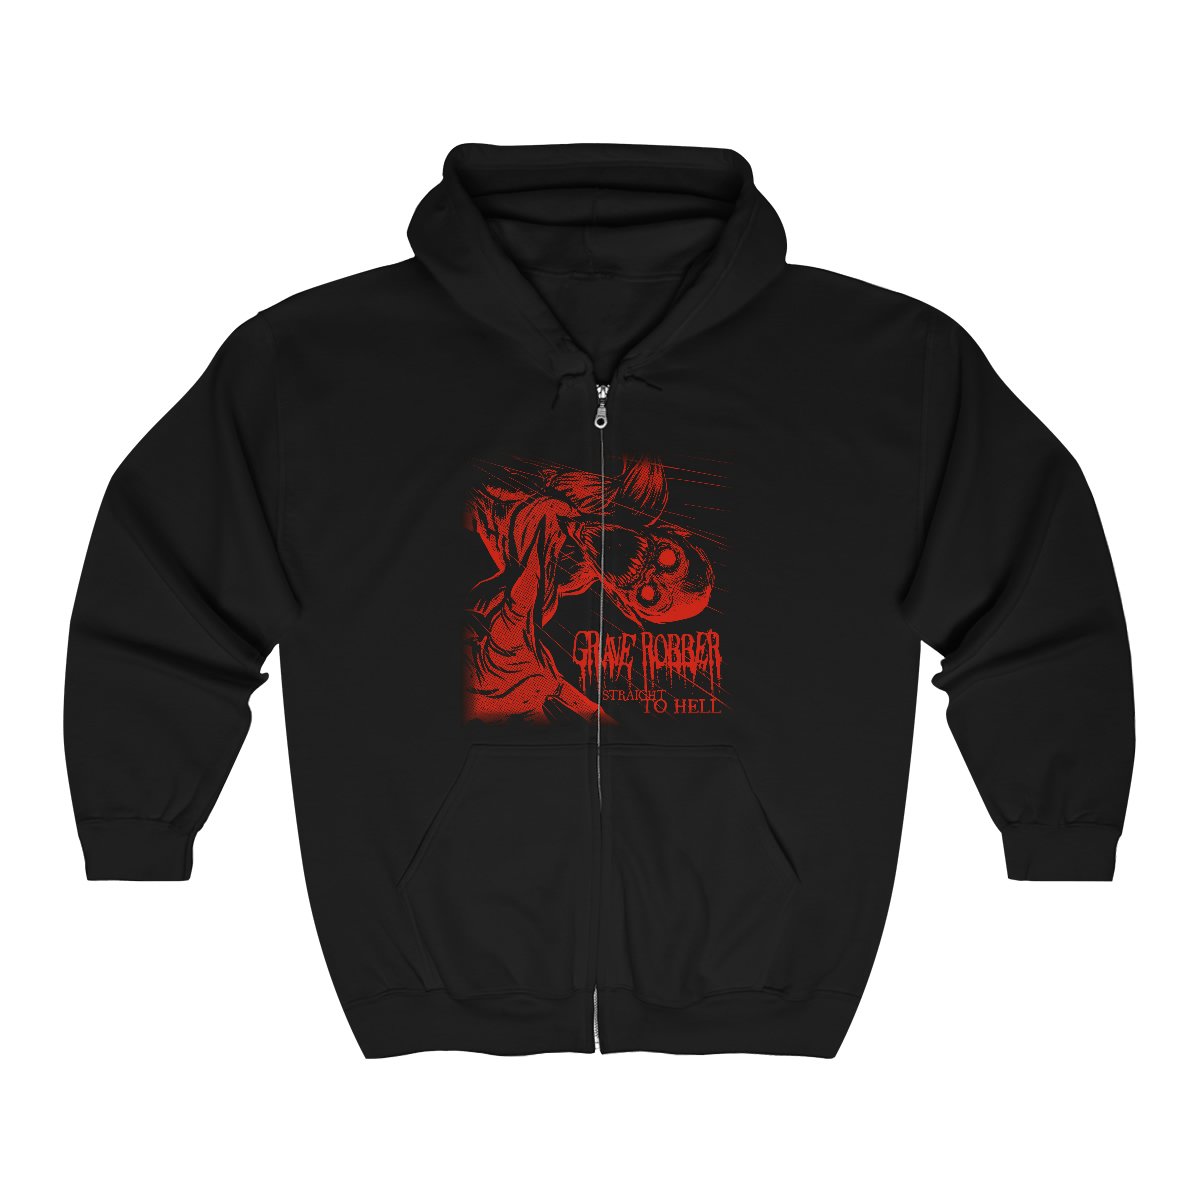 Grave Robber Straight to Hell (Red) Full Zip Hooded Sweatshirt